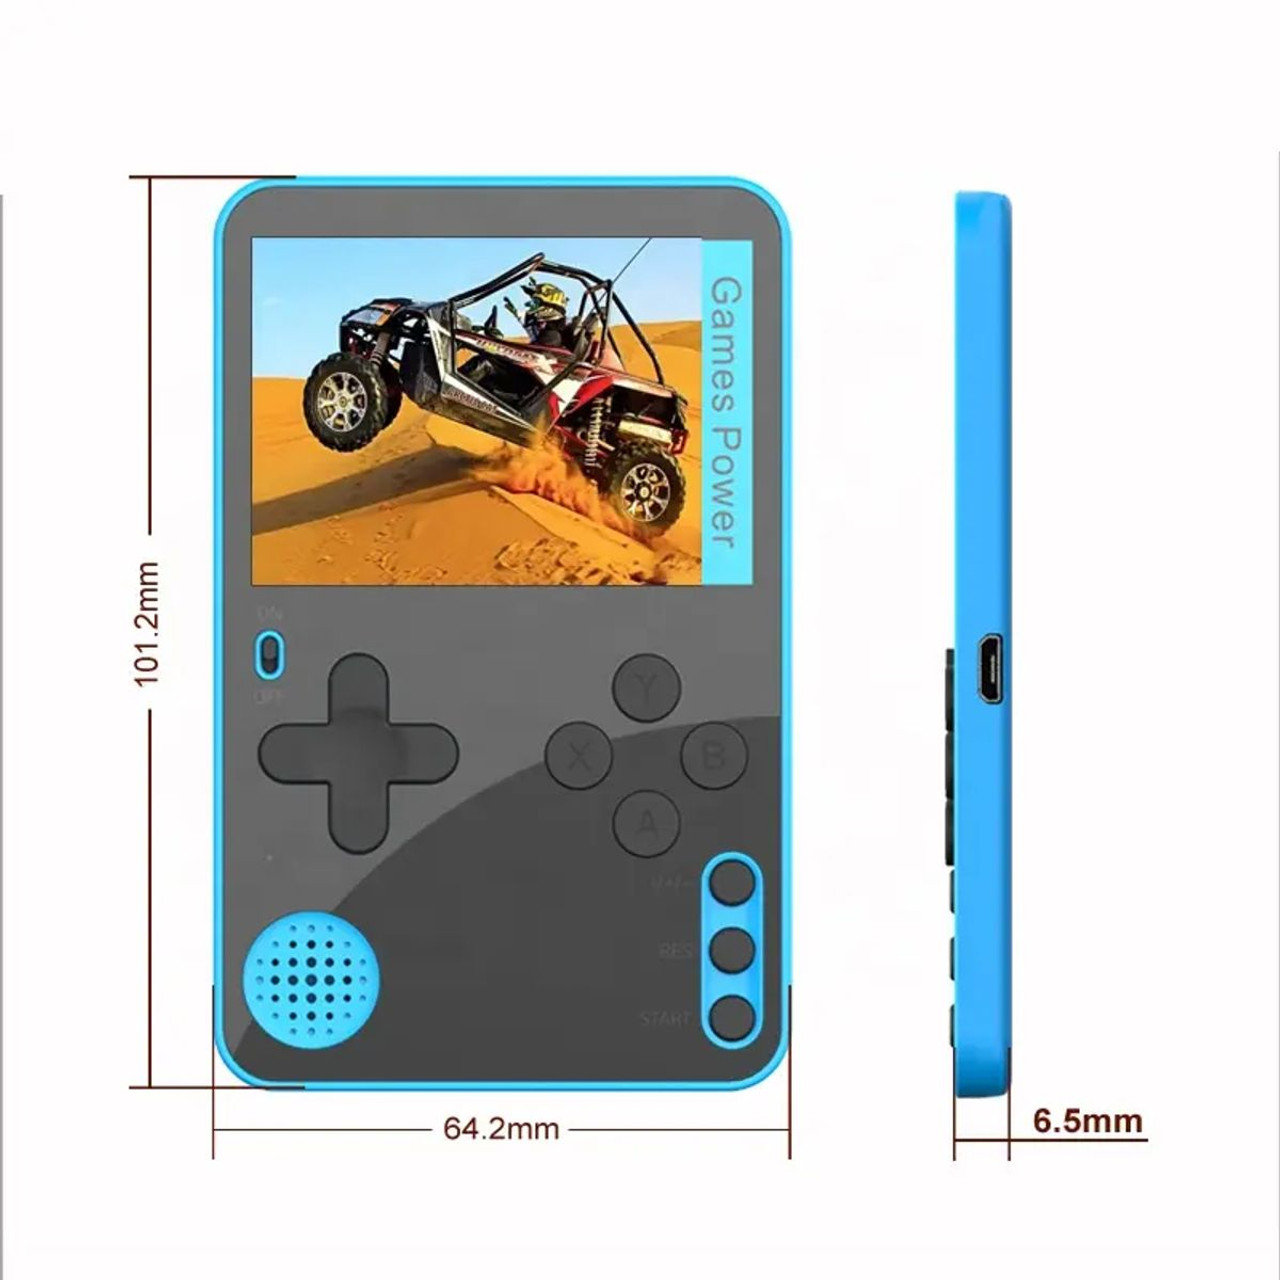 500-in-1 Mini Retro Handheld Video Game System product image